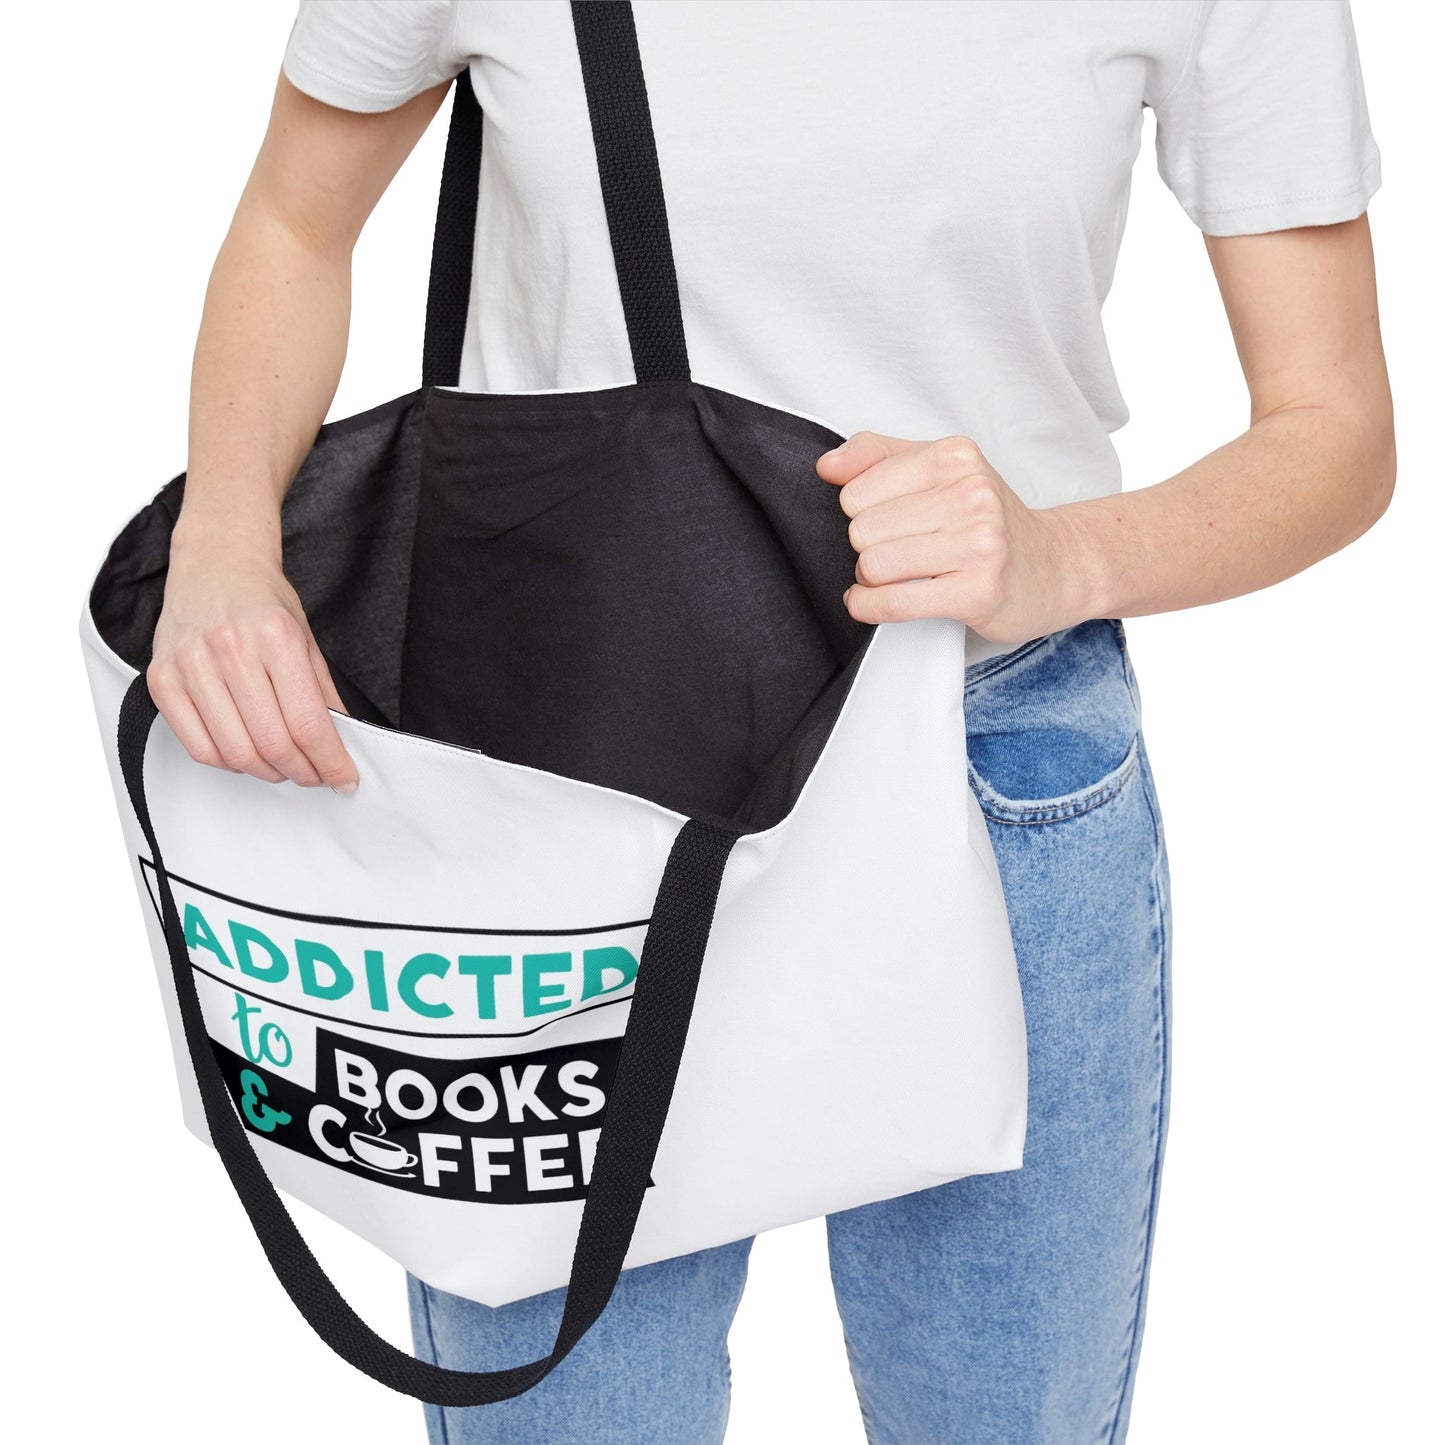 Addicted To Books And Coffee Weekender Tote Bag - Rachel Hanna